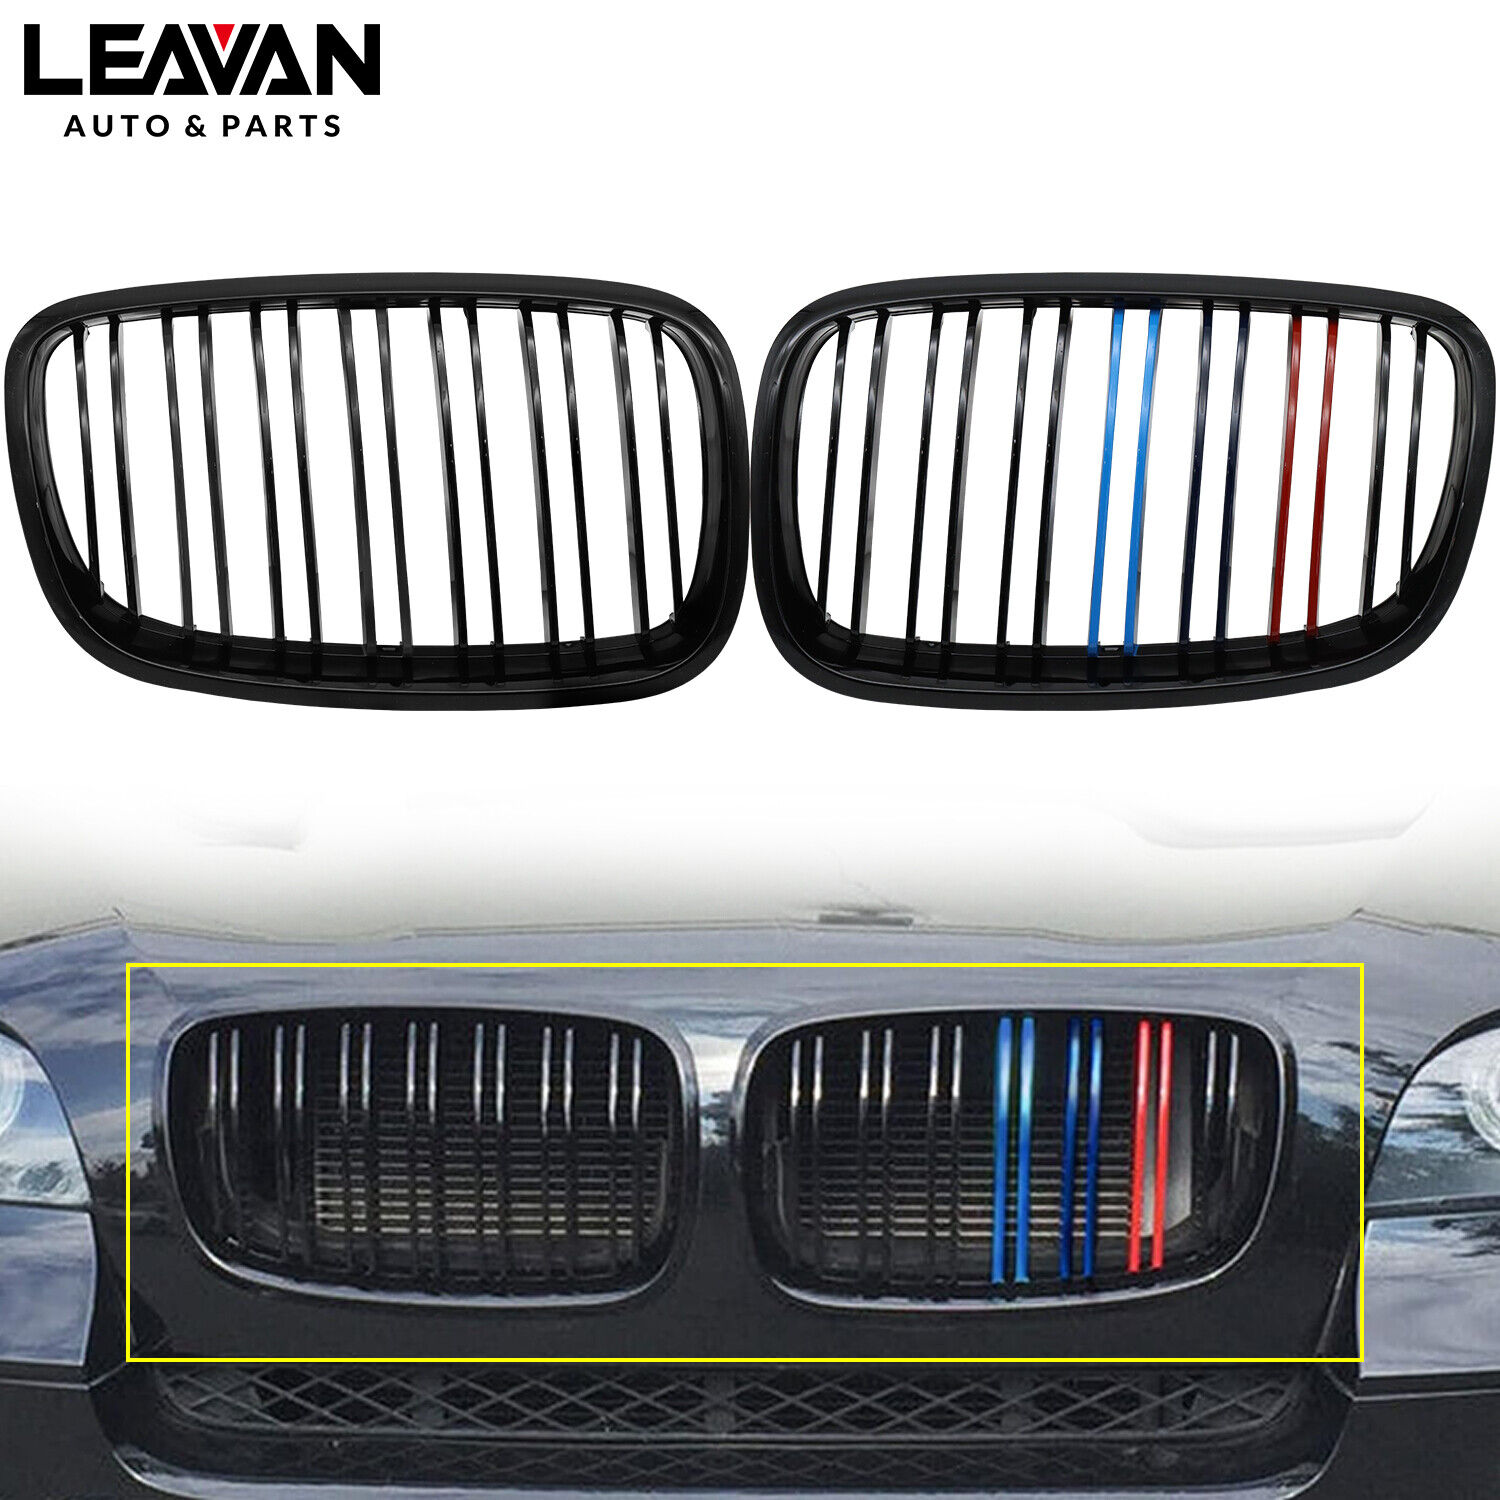 M-Color Gloss Black Front Grill Grille Dual Slat For BMW X5 X6 E70 E71 2007-2013